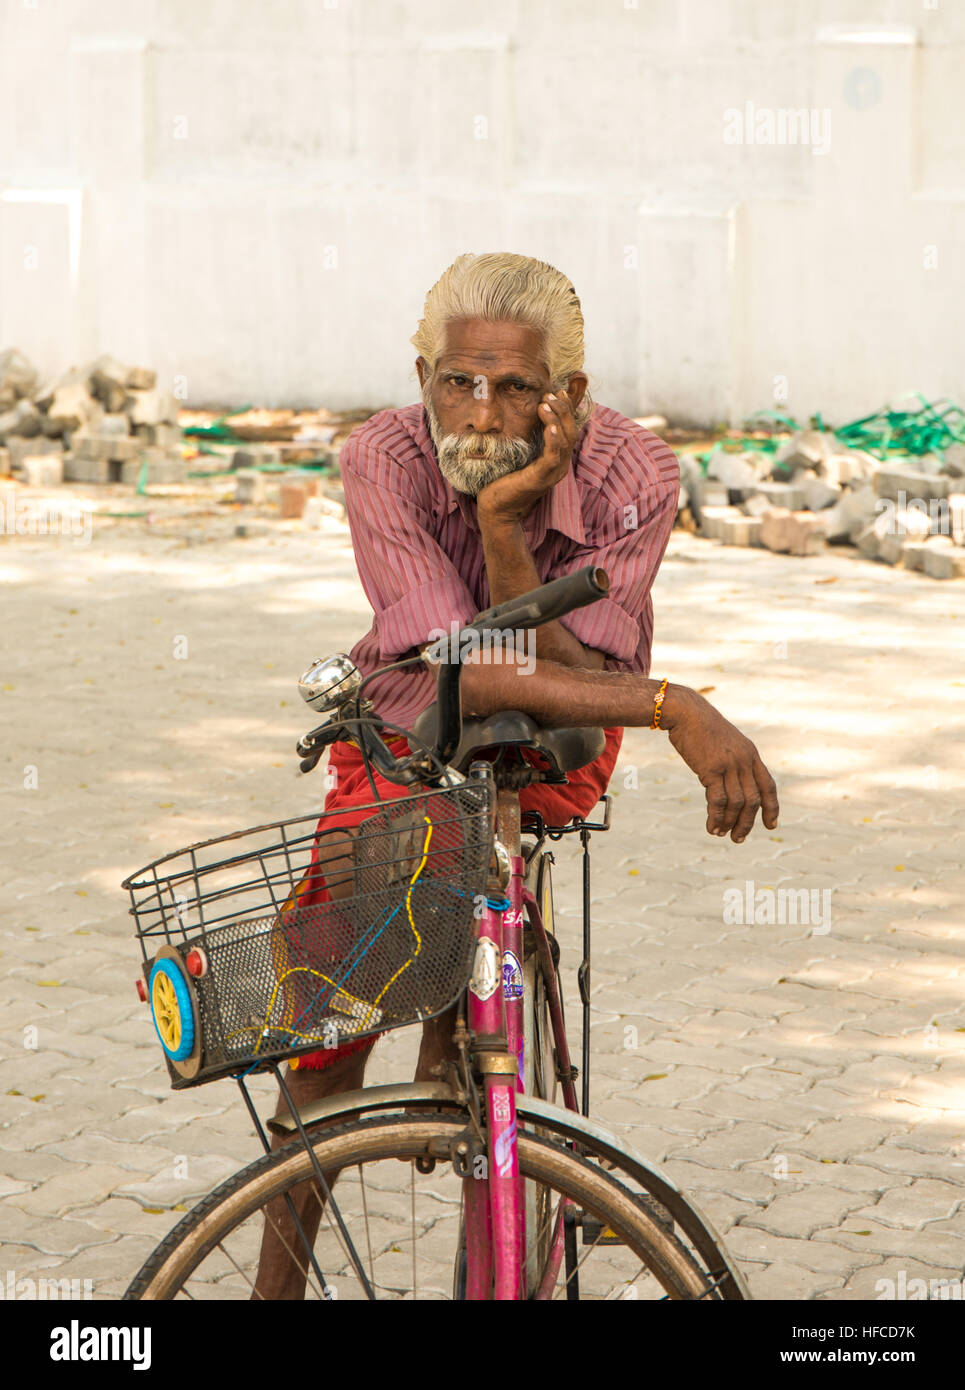 Old Indian man with grey hair and a grey bear sitting on his bicycle Stock Photo